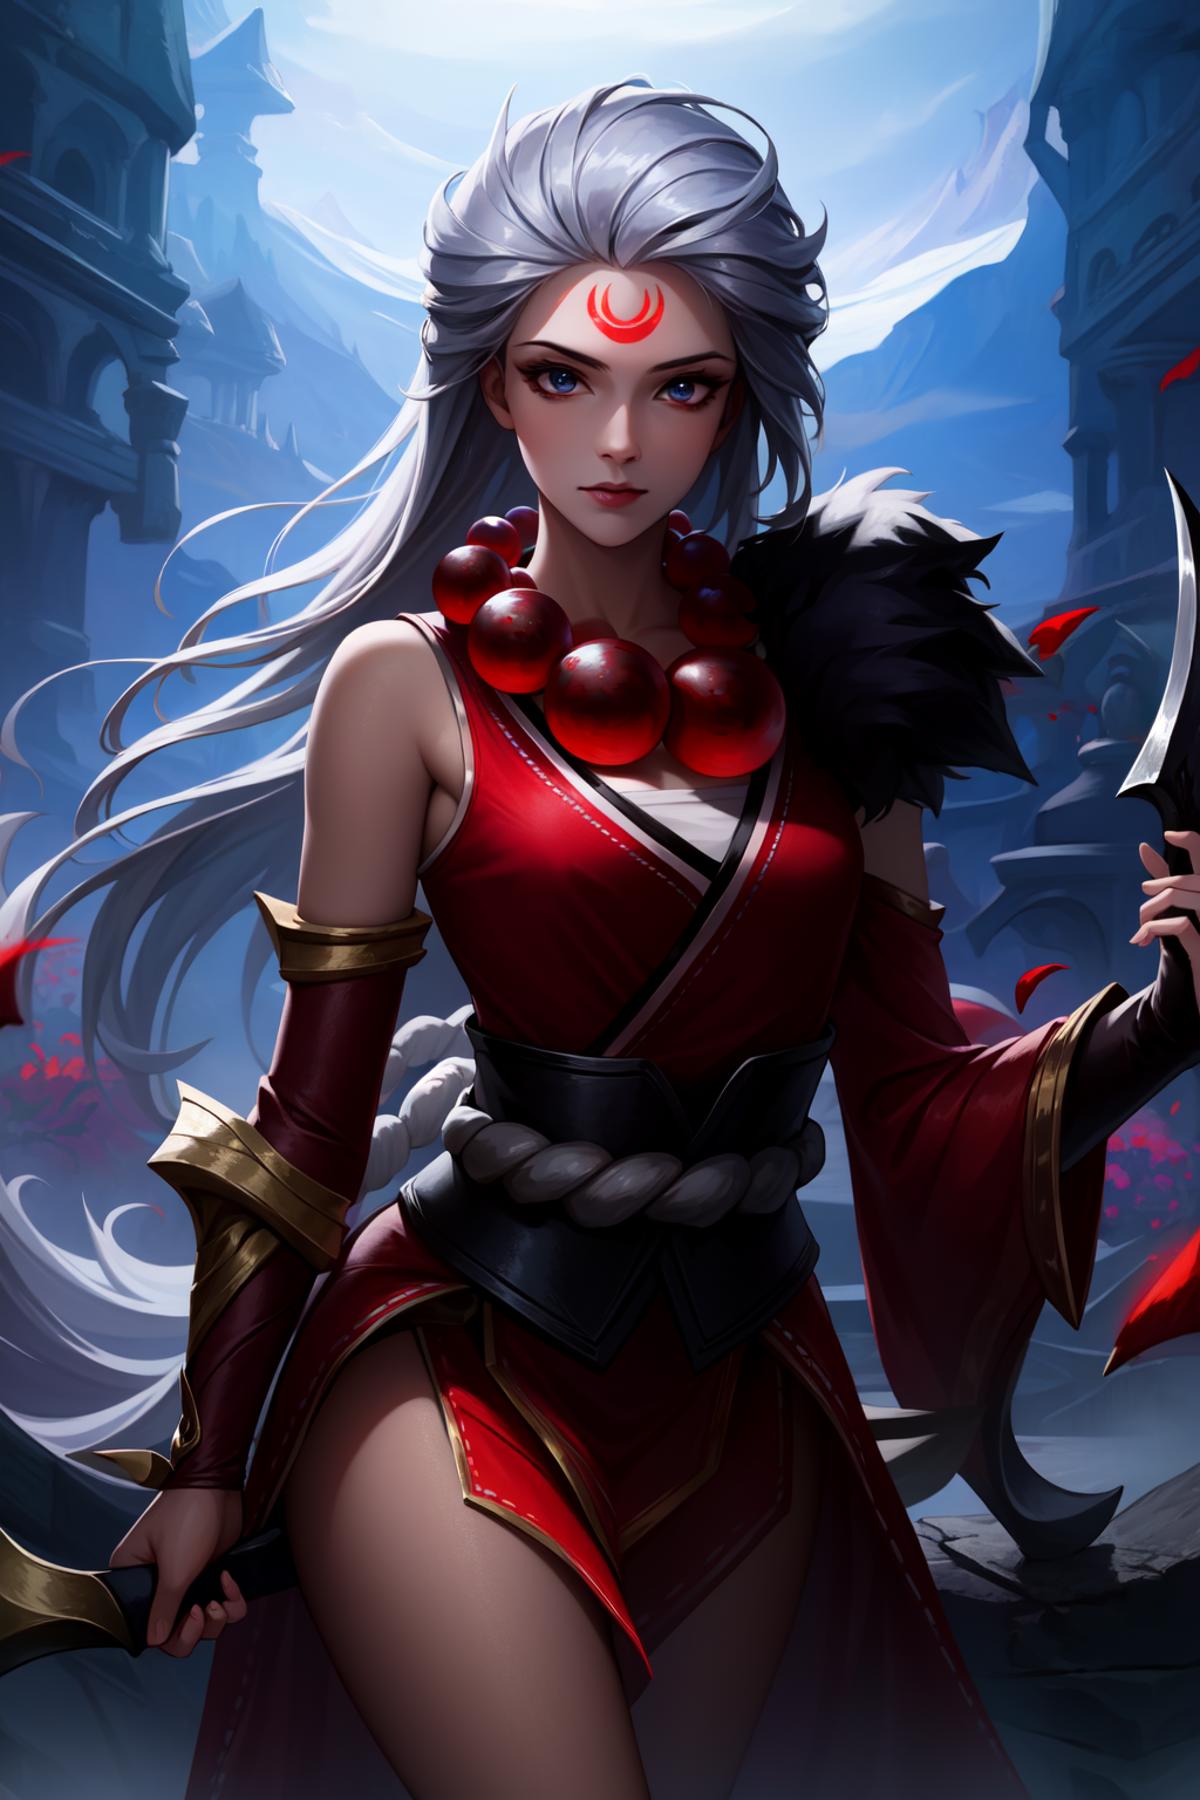 Diana + Blood Moon Diana | League of Legends image by AhriMain